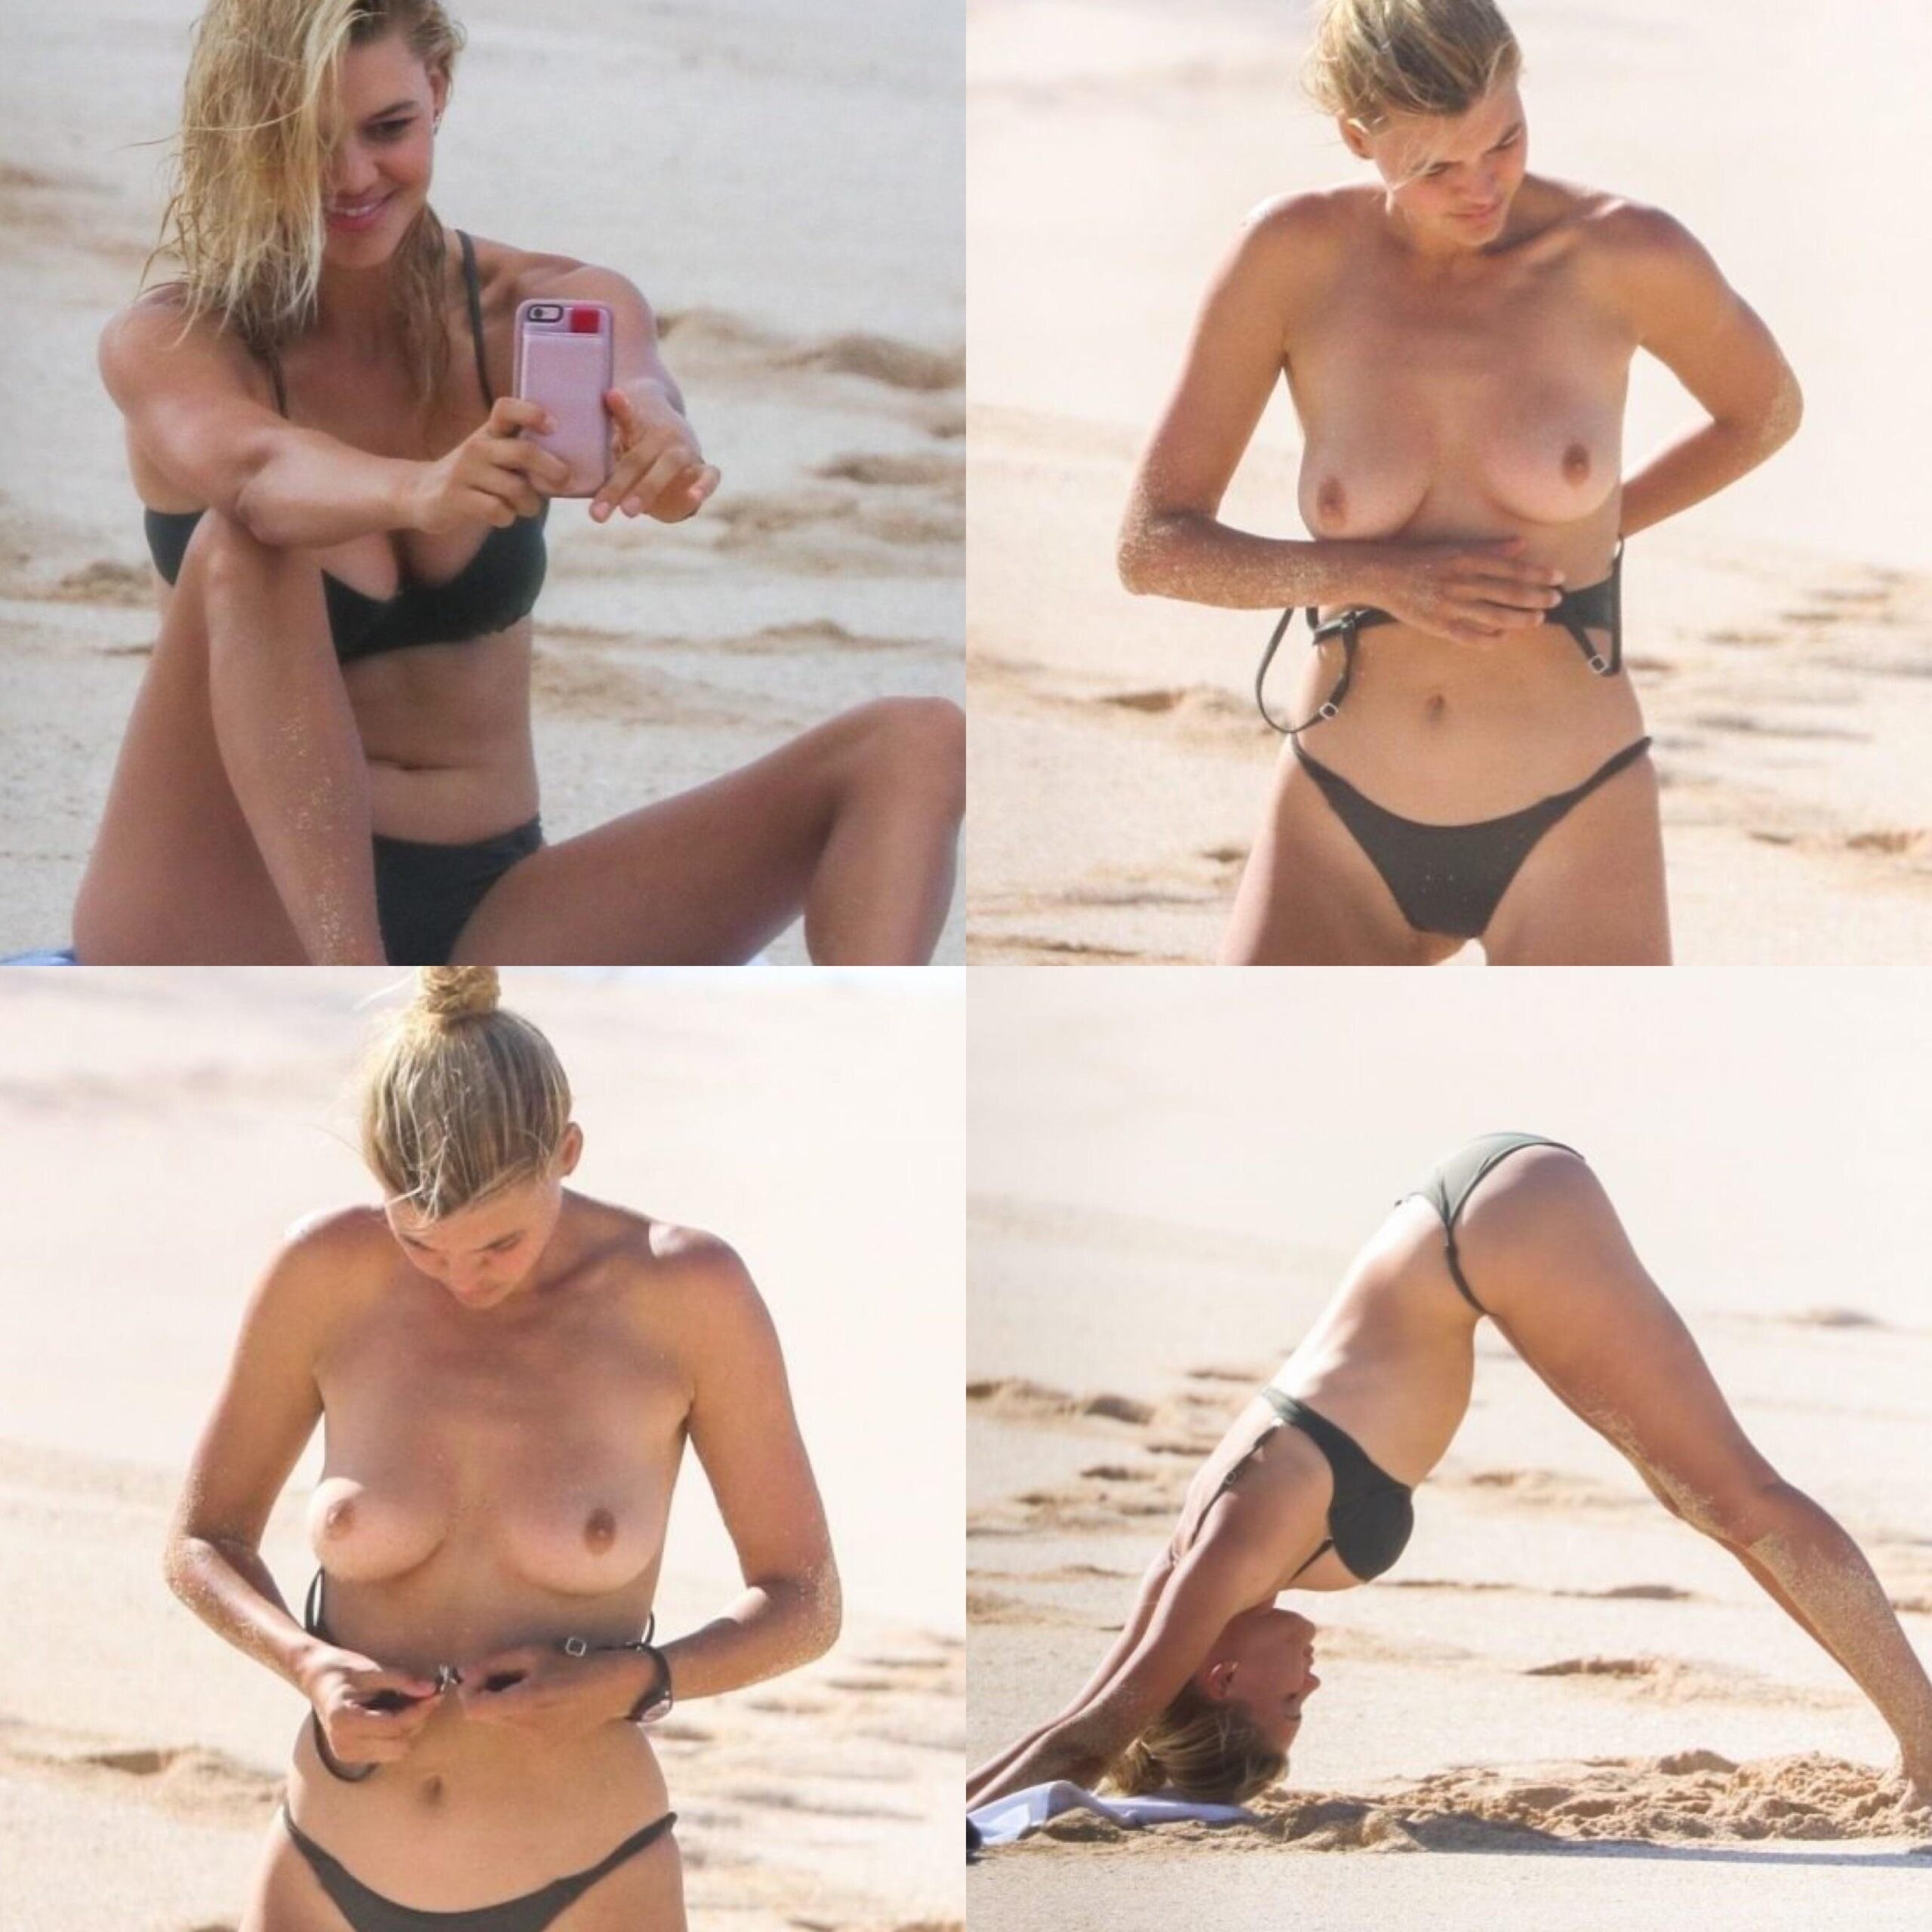 Kelly rohrbach leaked nudes